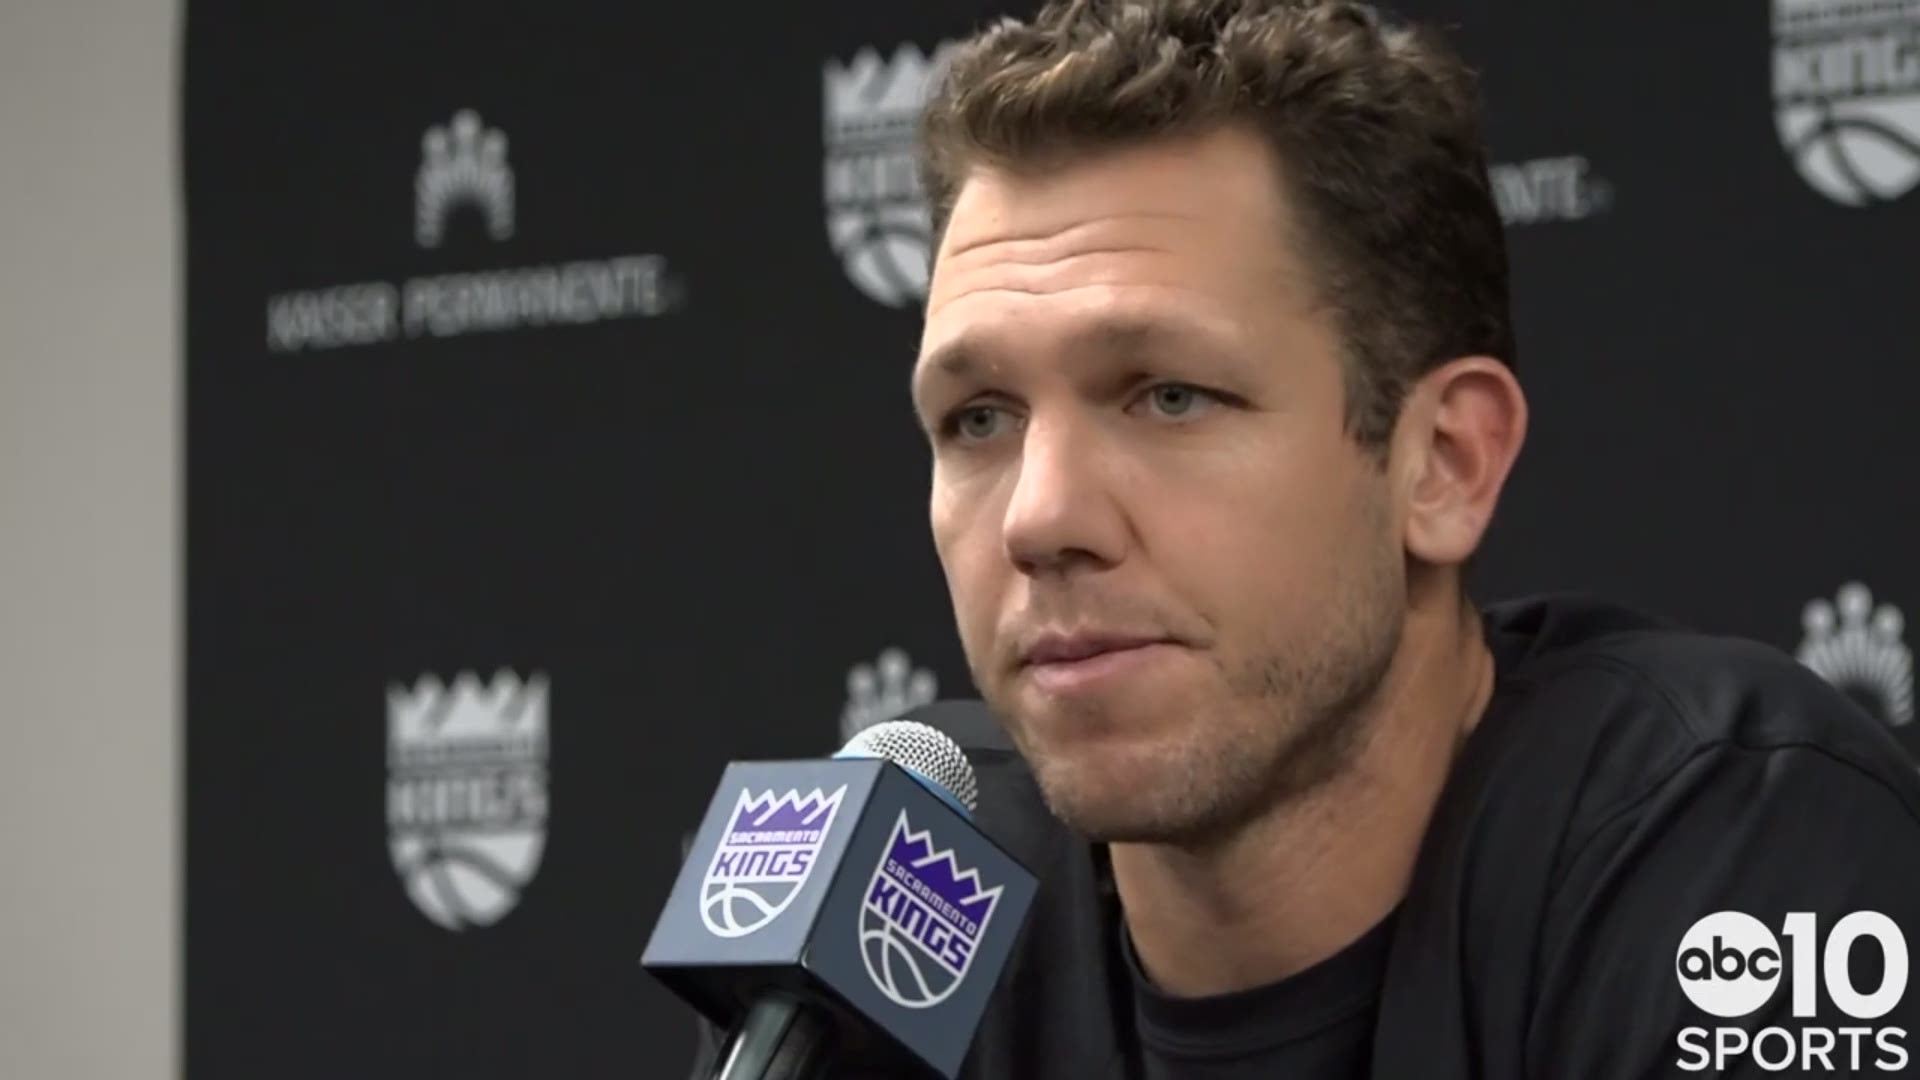 In his pregame chat with reporters, Sacramento Kings head coach Luke Walton discusses Monday's matchup with the Chicago Bulls and the progress his team is making.